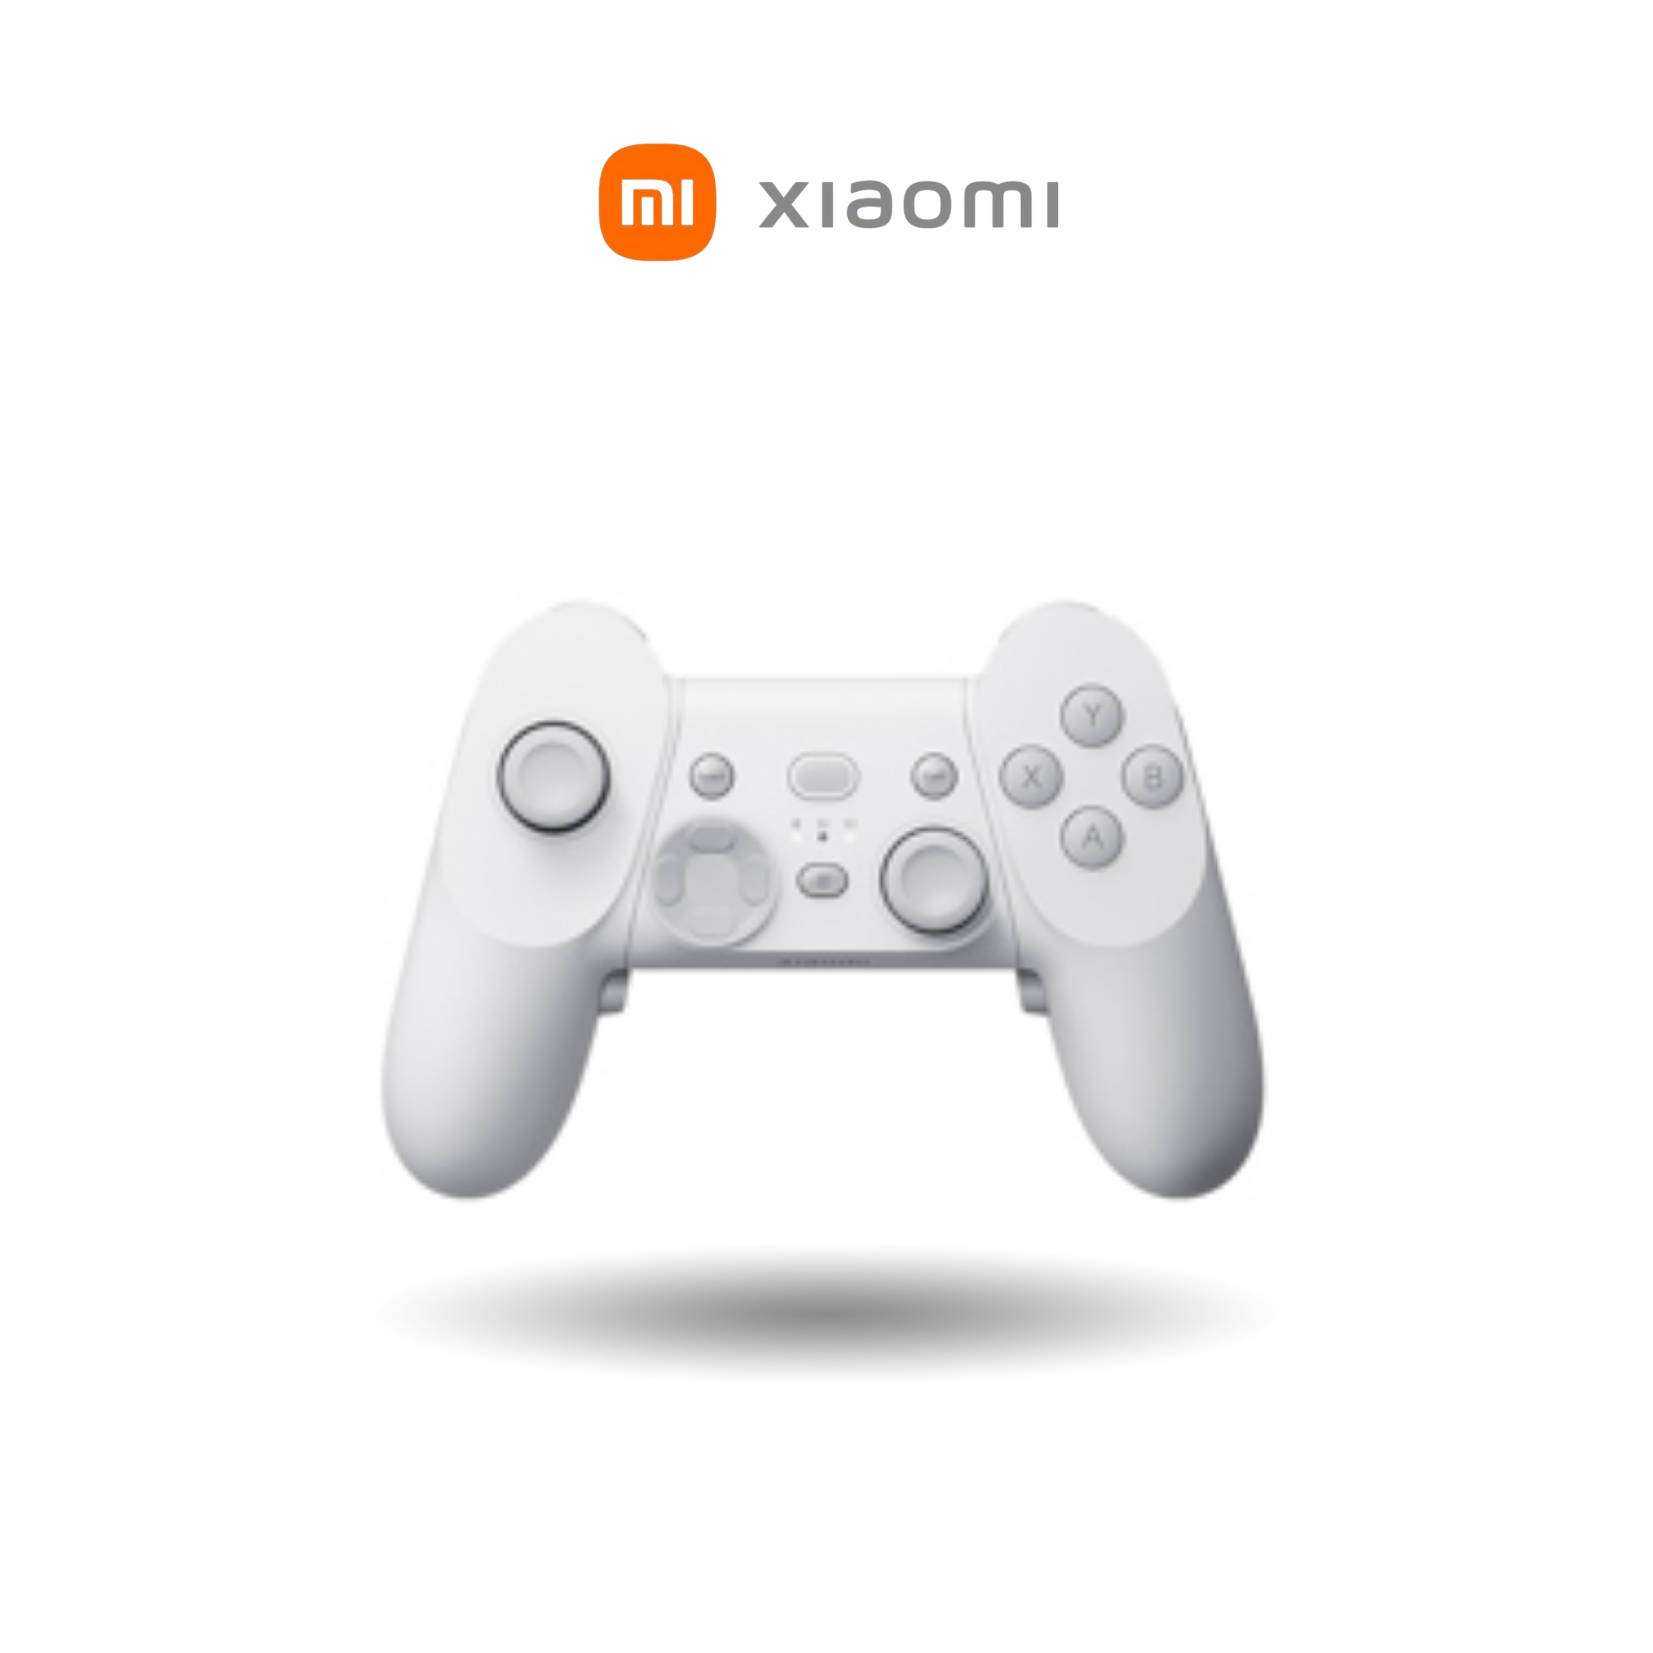 Original Xiaomi Gamepad Elite Edition For Android Phone Pad TV Win PC Game Bluetooth 2.4G ALPS Joystick 6-Axis Gyro Linear Motor in india